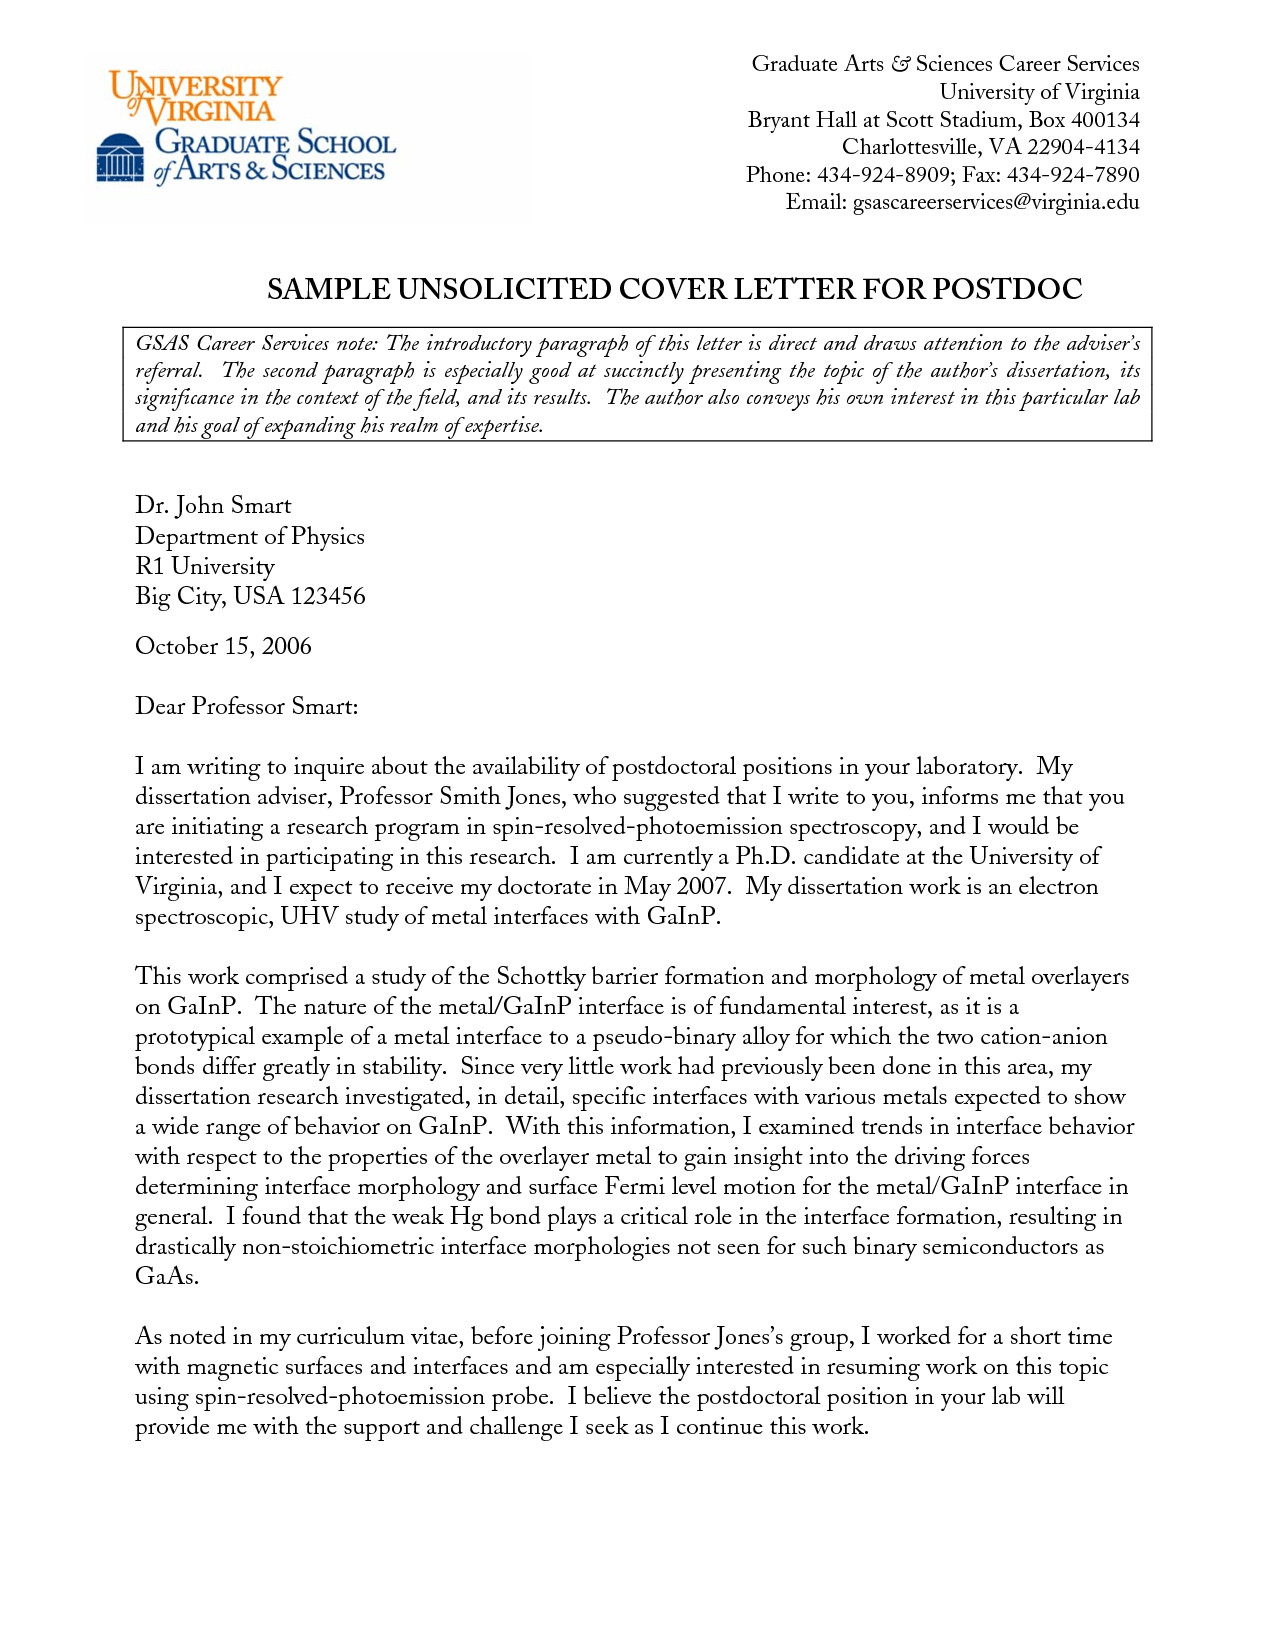 cover letter template for unsolicited resume